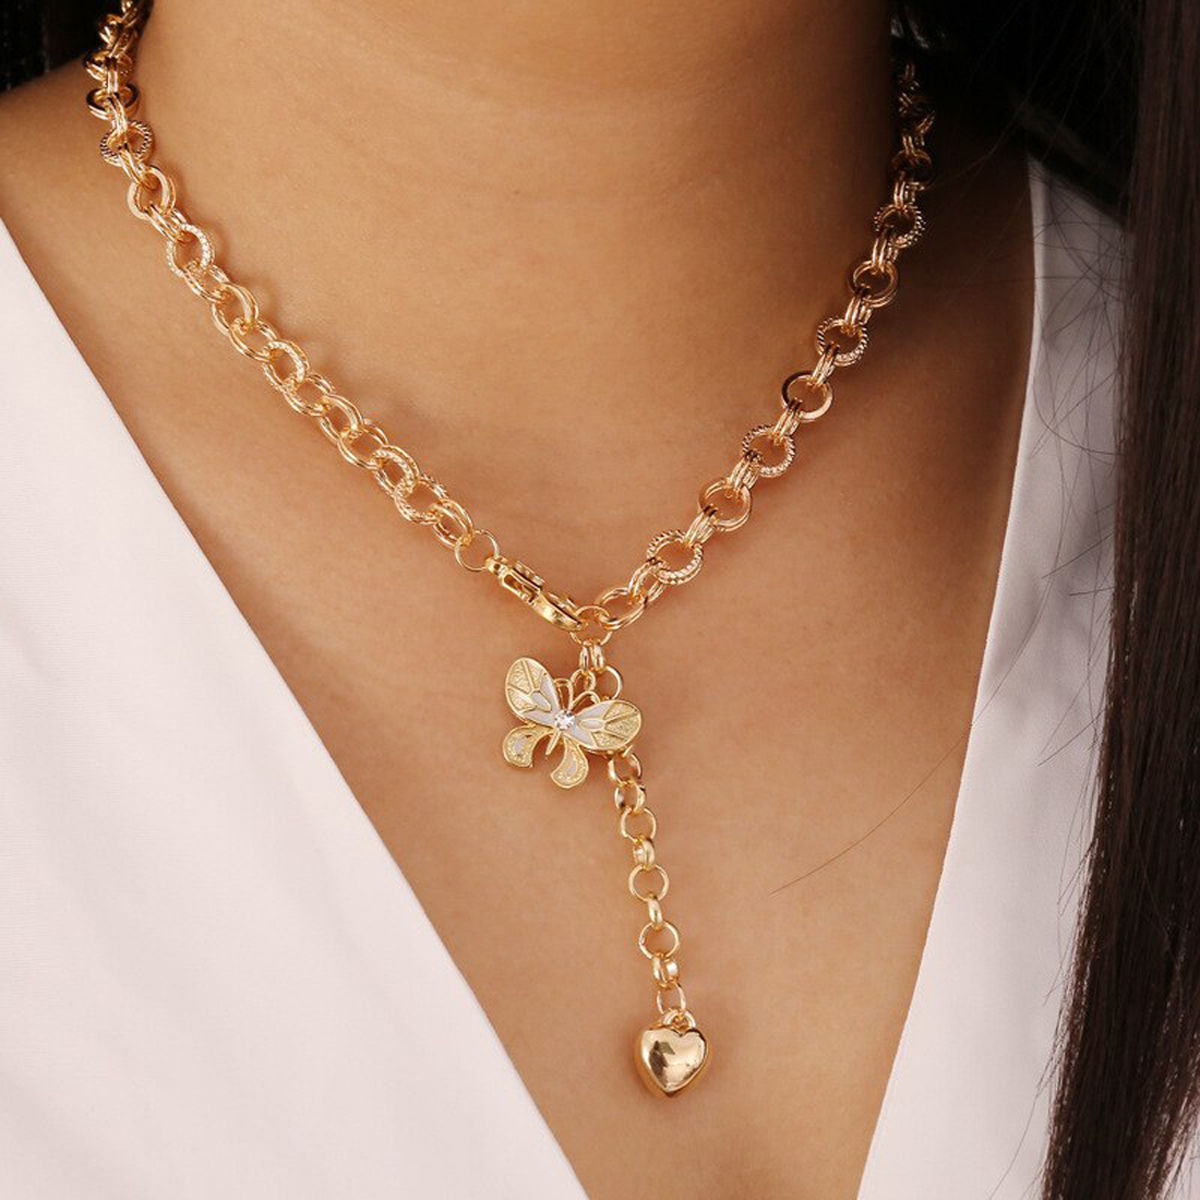 Bow Necklace Dainty Gold Bow Pendant Necklace Choker for Women Girls Bow  Jewelry - Walmart.com